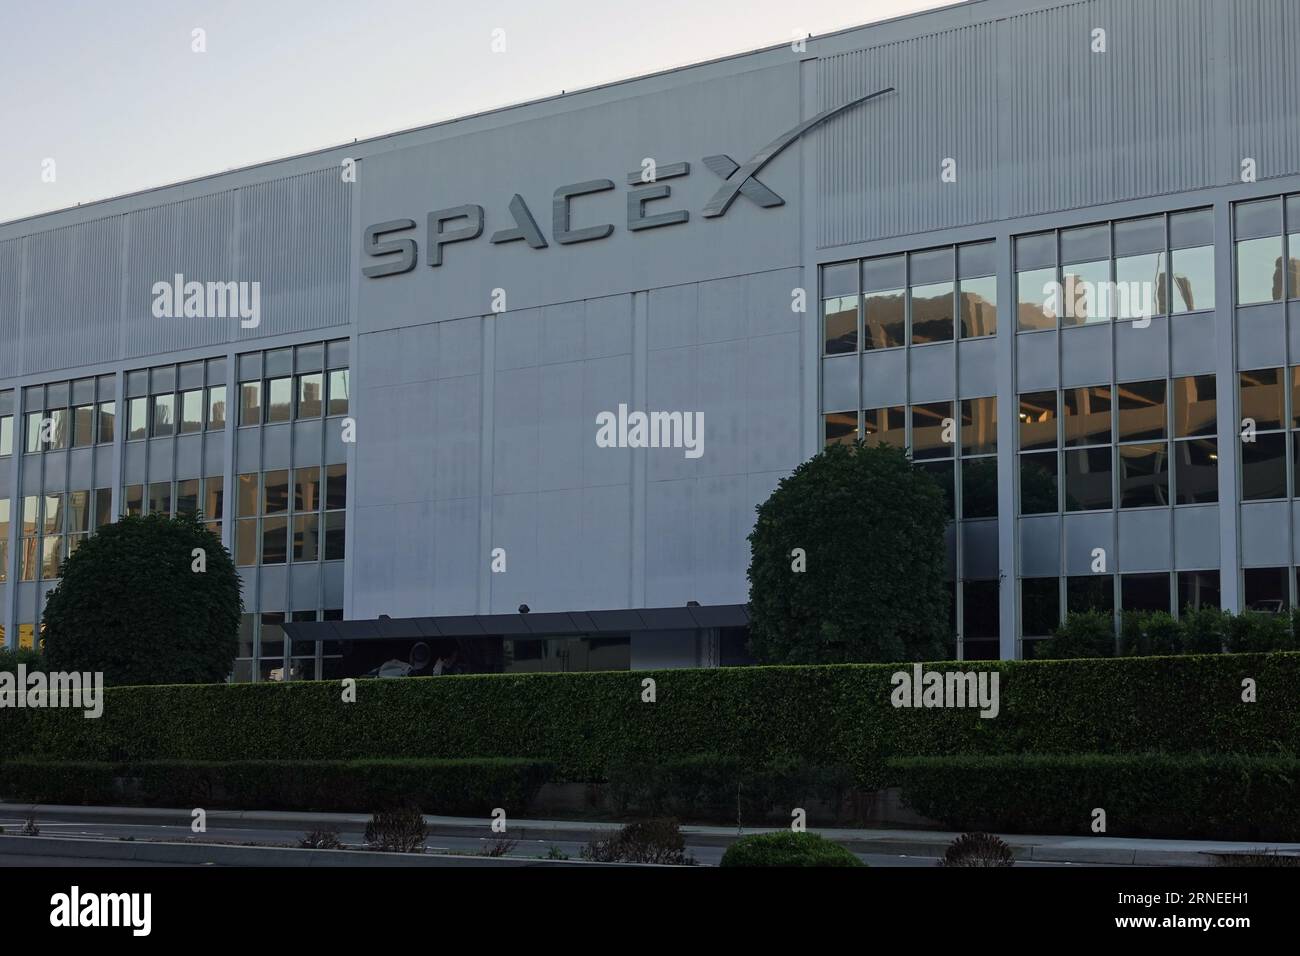 Hawthorne, California, USA - Aug. 30, 2023: The SpaceX (Space Exploration Technologies Corp.) company logo and headquarters is shown. Stock Photo